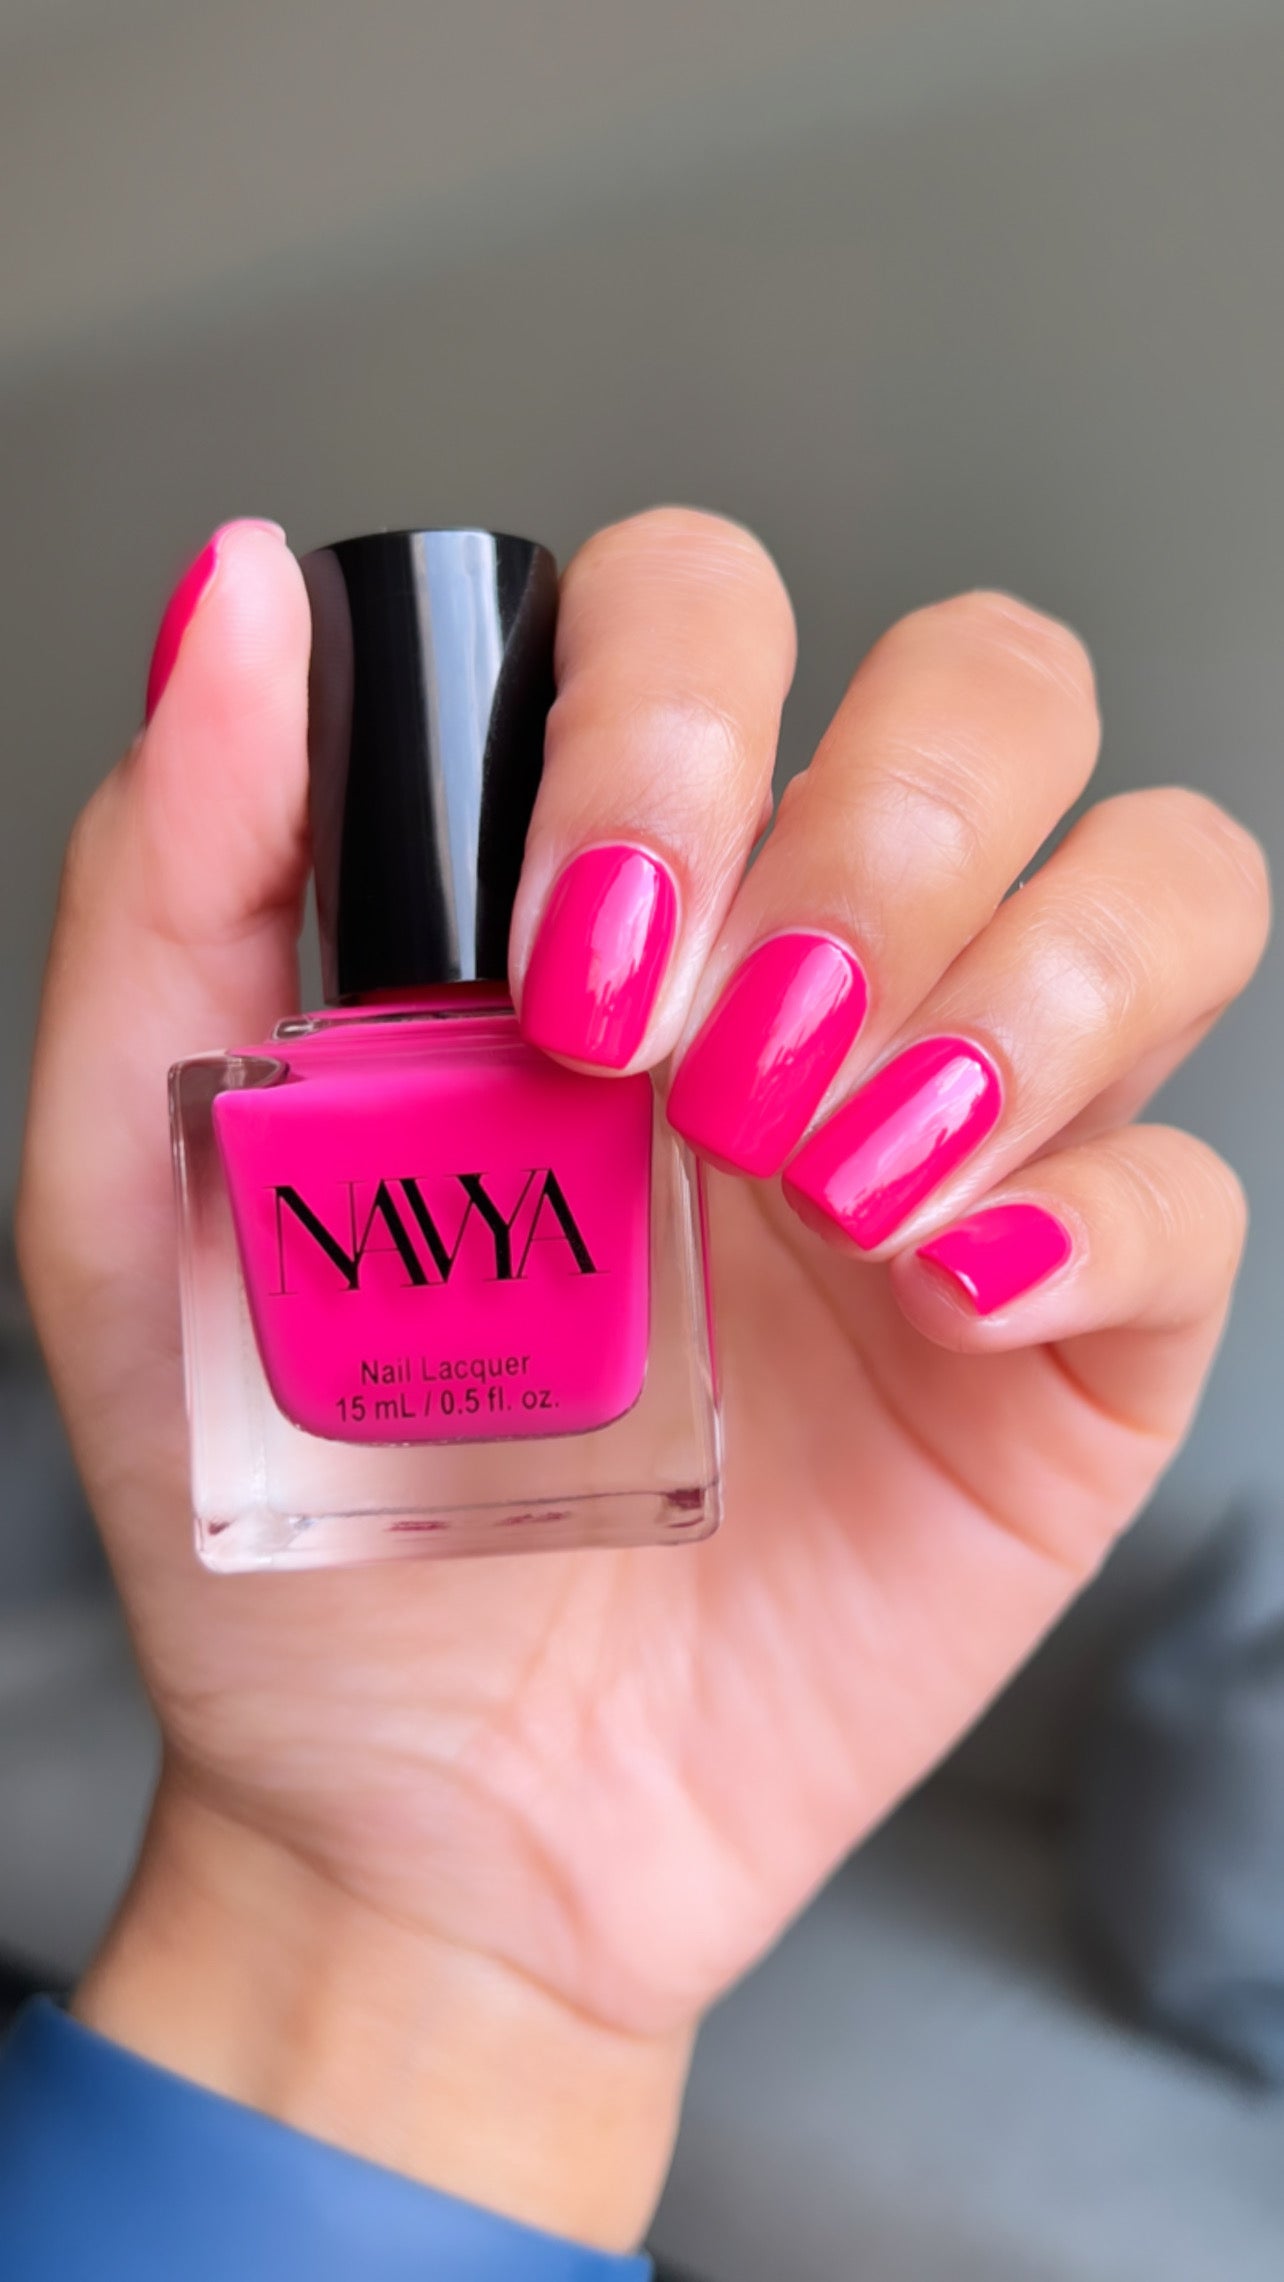 Miss Nails Cosmetics (@missnailsforyou) • Instagram photos and videos